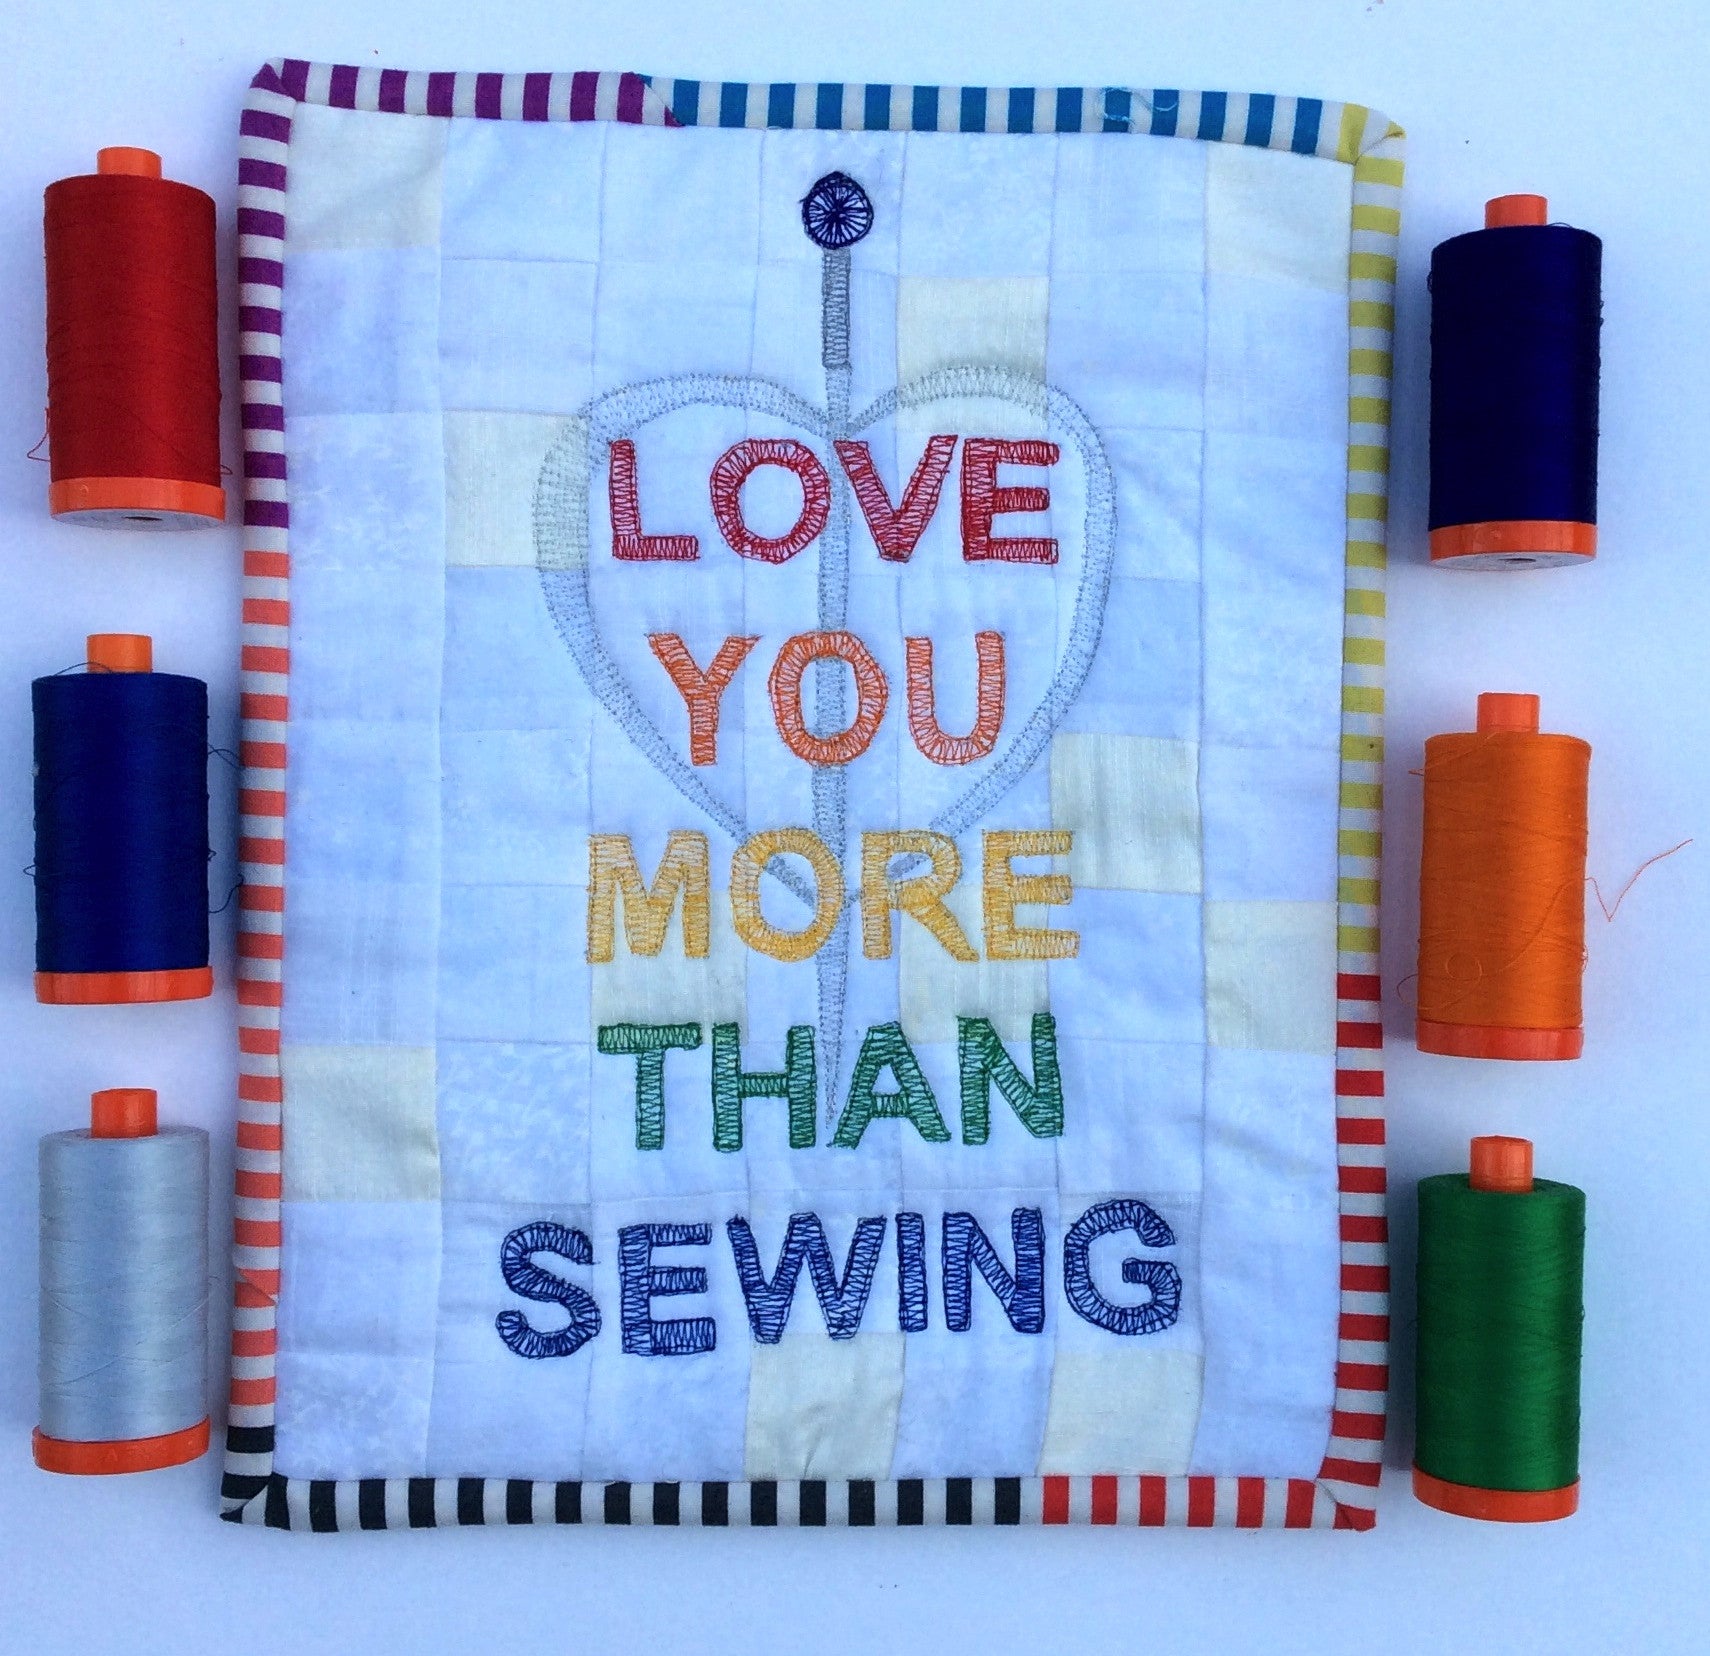 If you love sewing read this blog